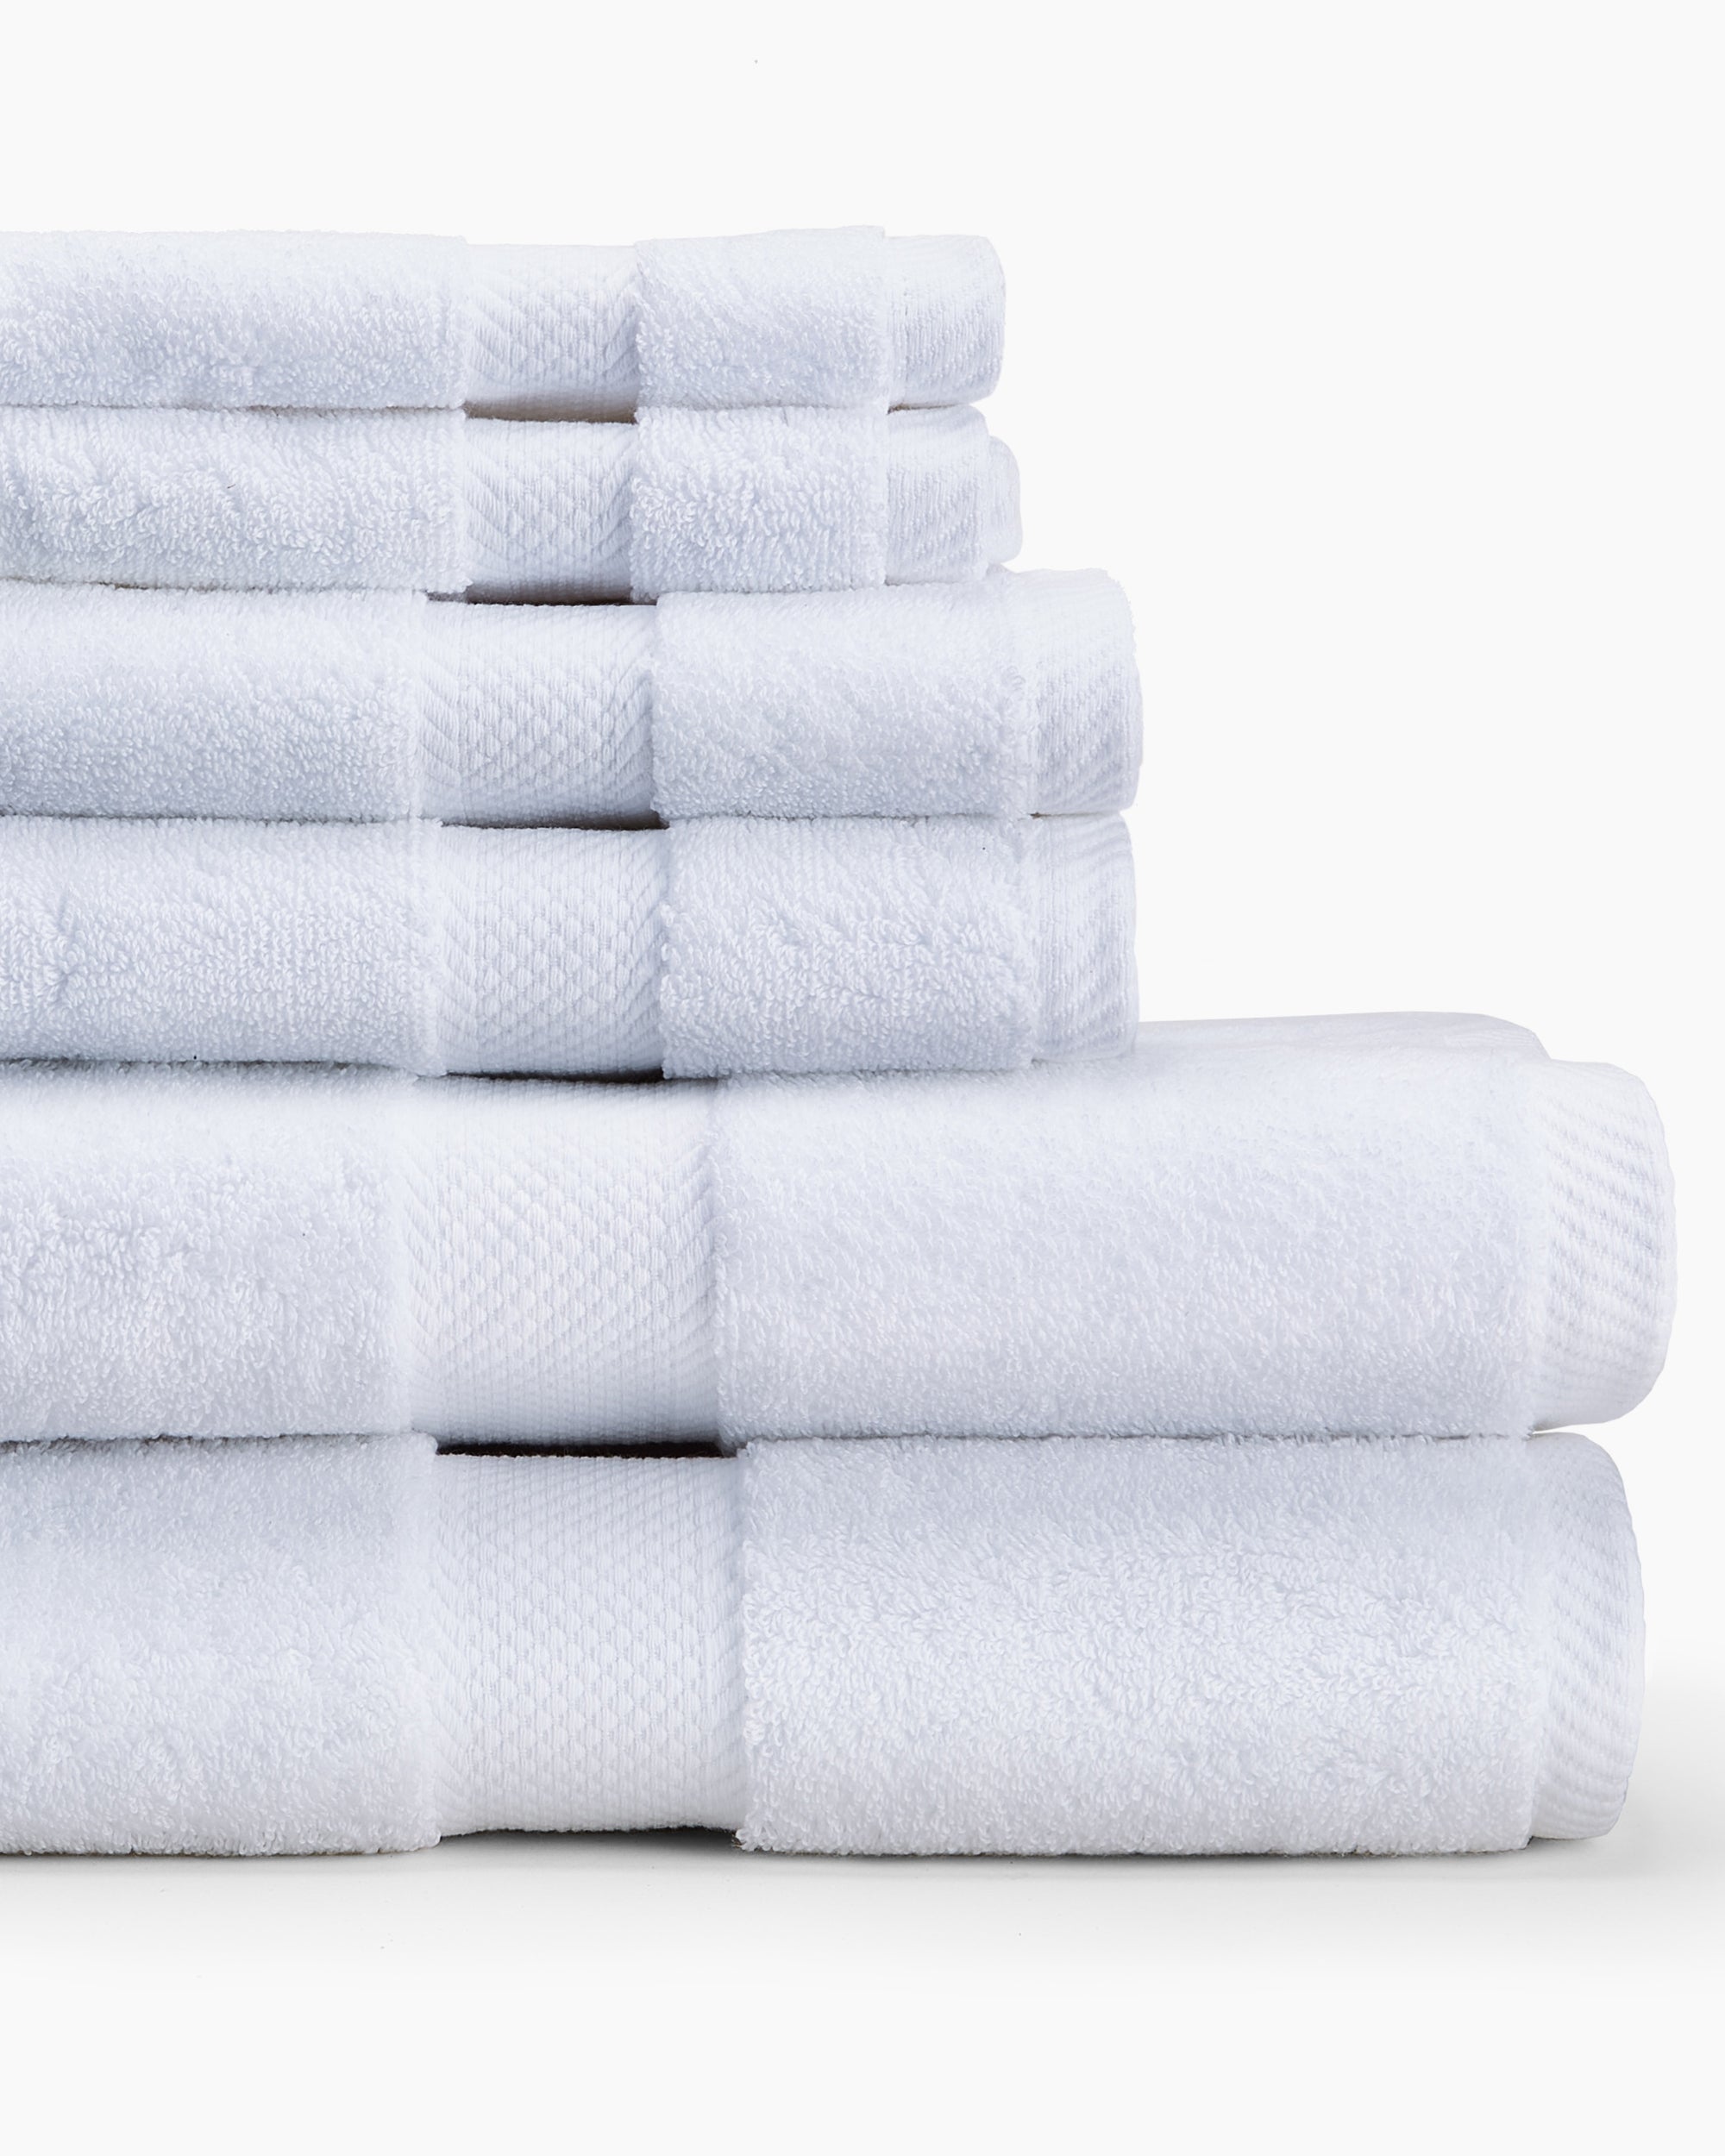 MyPillow: Bath Towels That Actually Work!